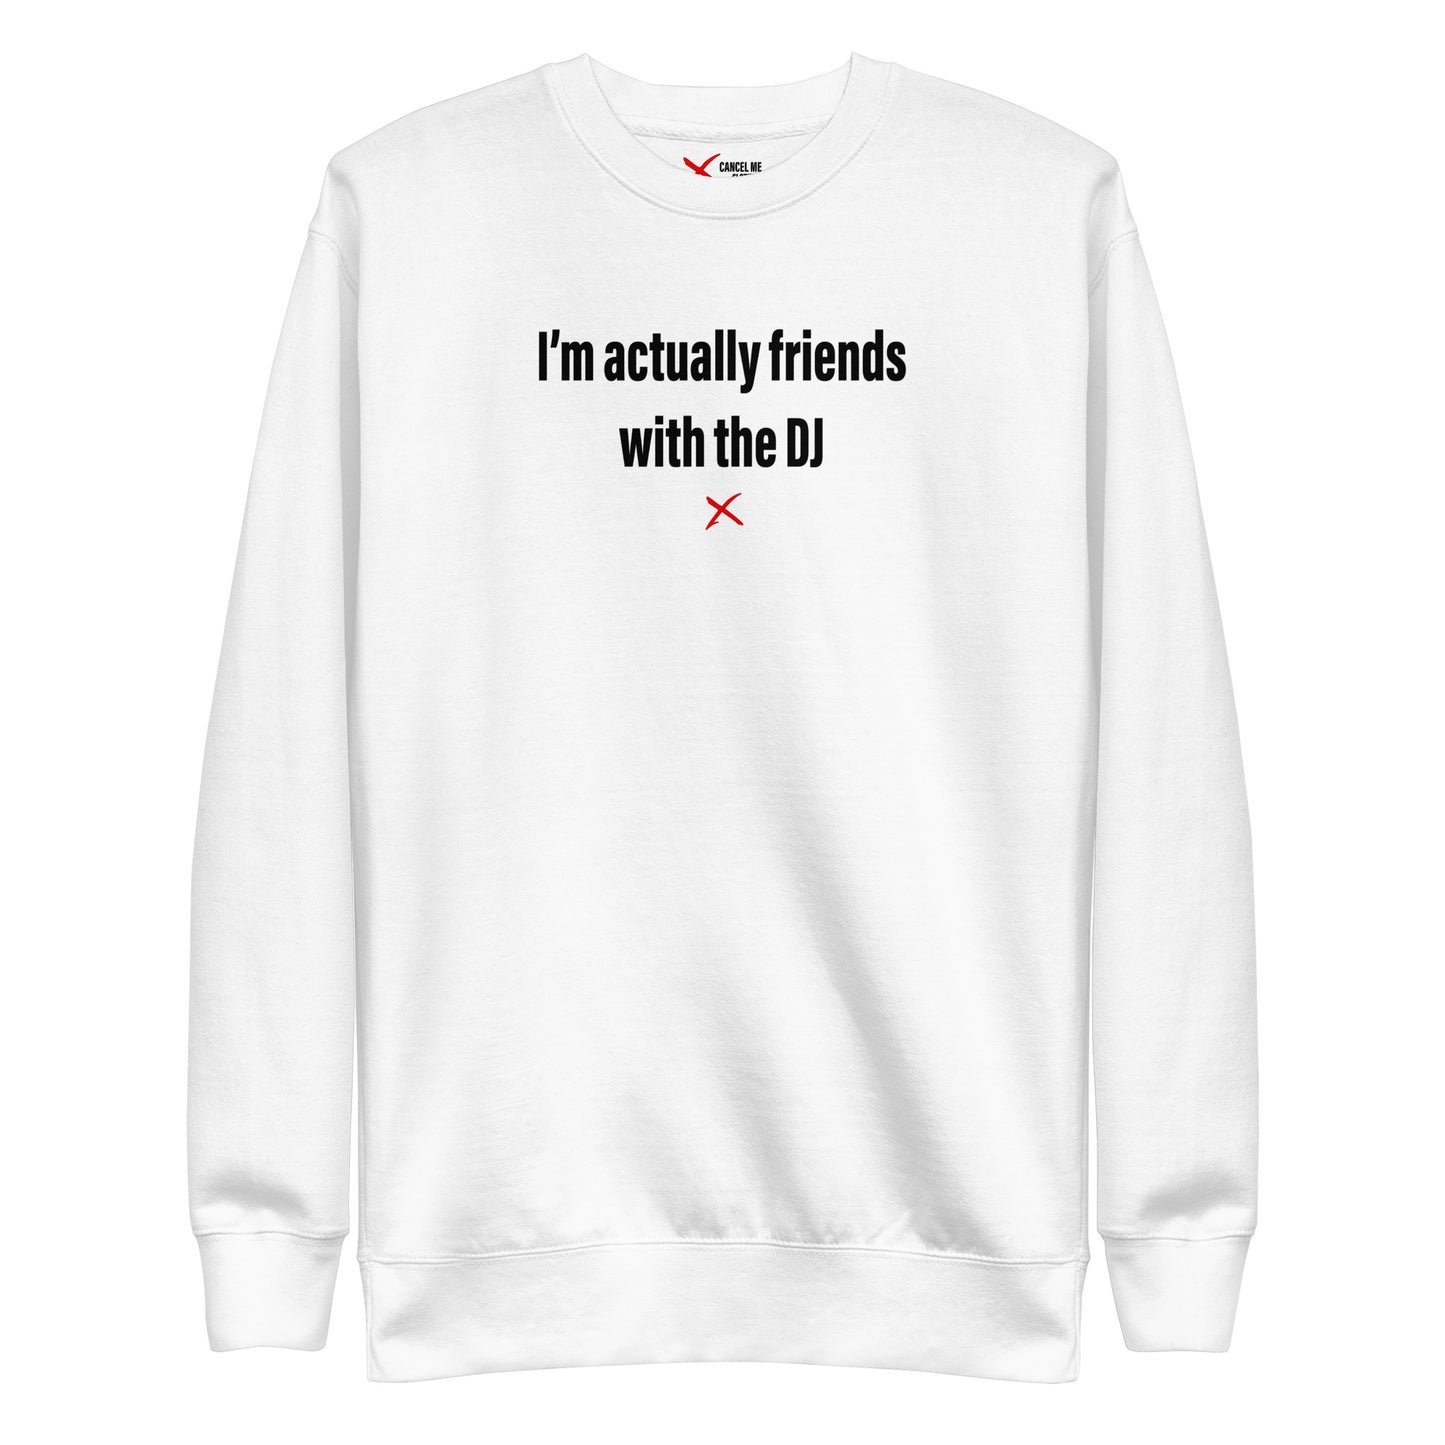 I'm actually friends with the DJ - Sweatshirt